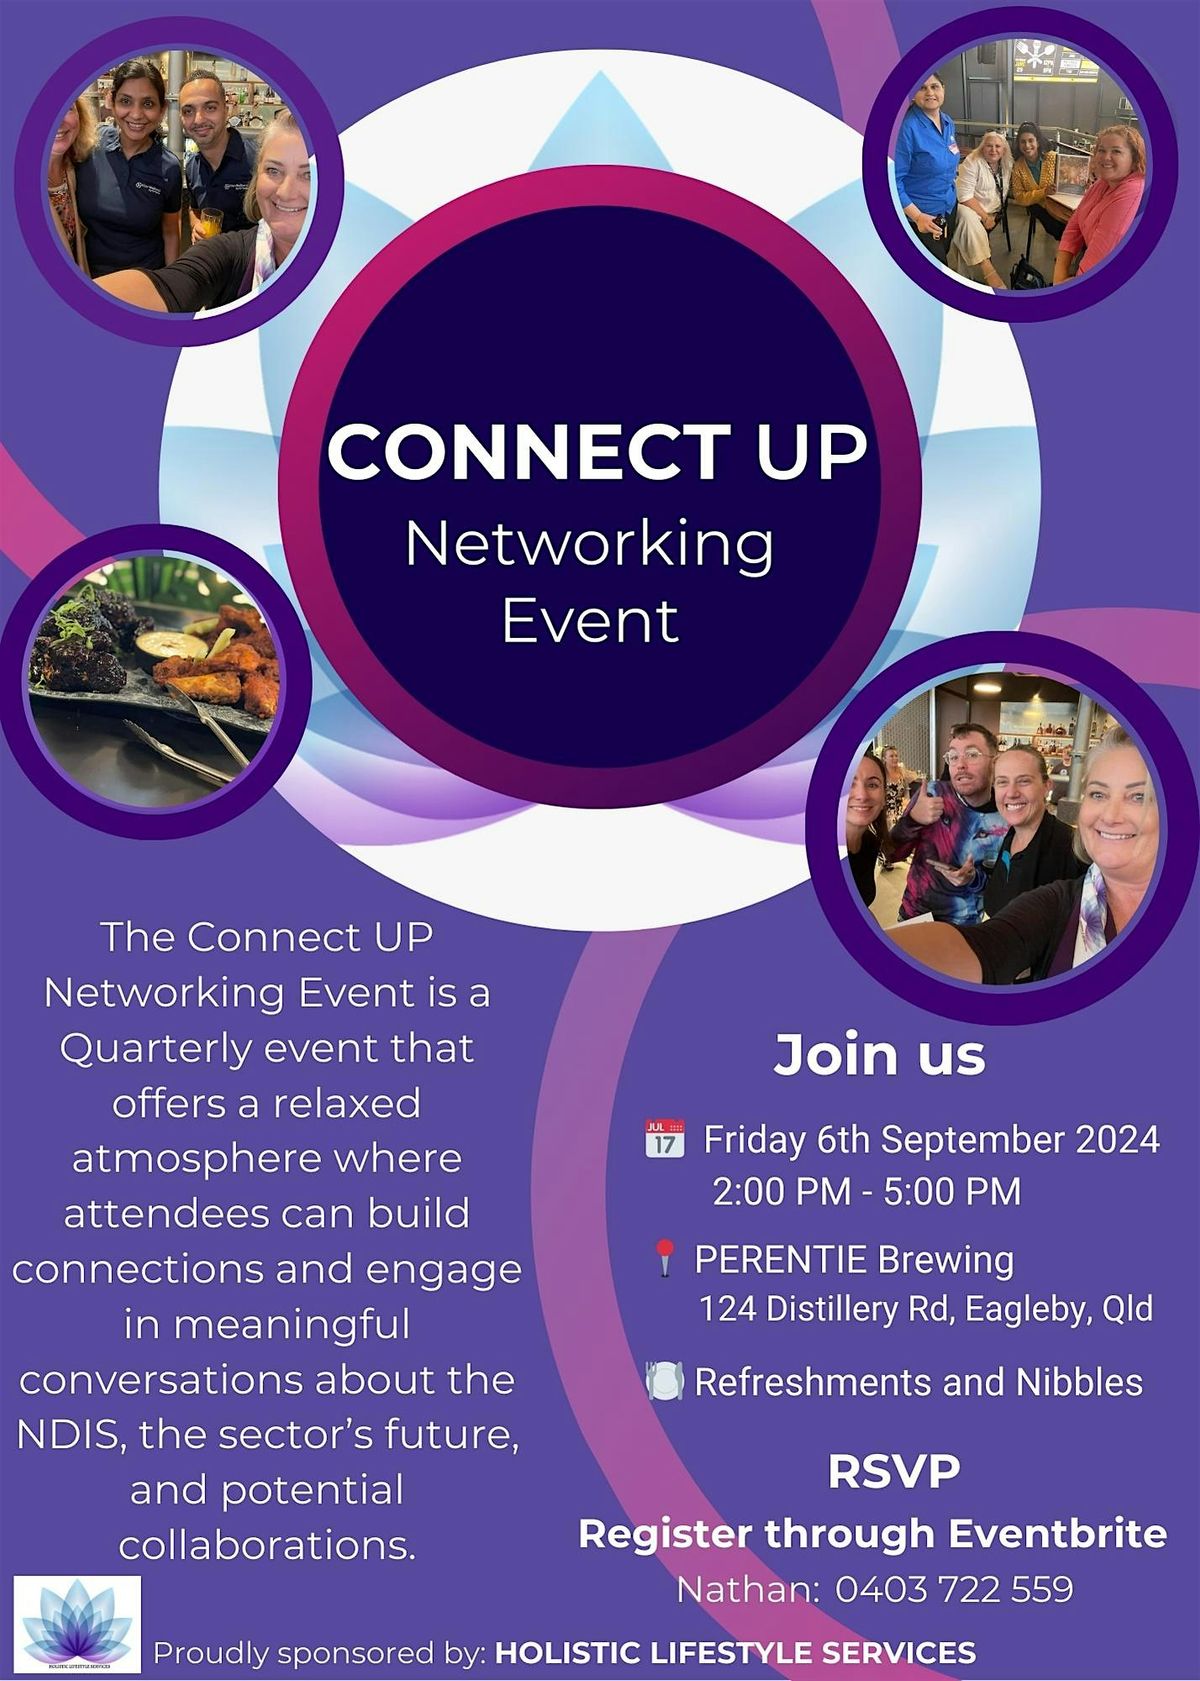 Connect UP NDIS Networking Event with a relaxed atmosphere